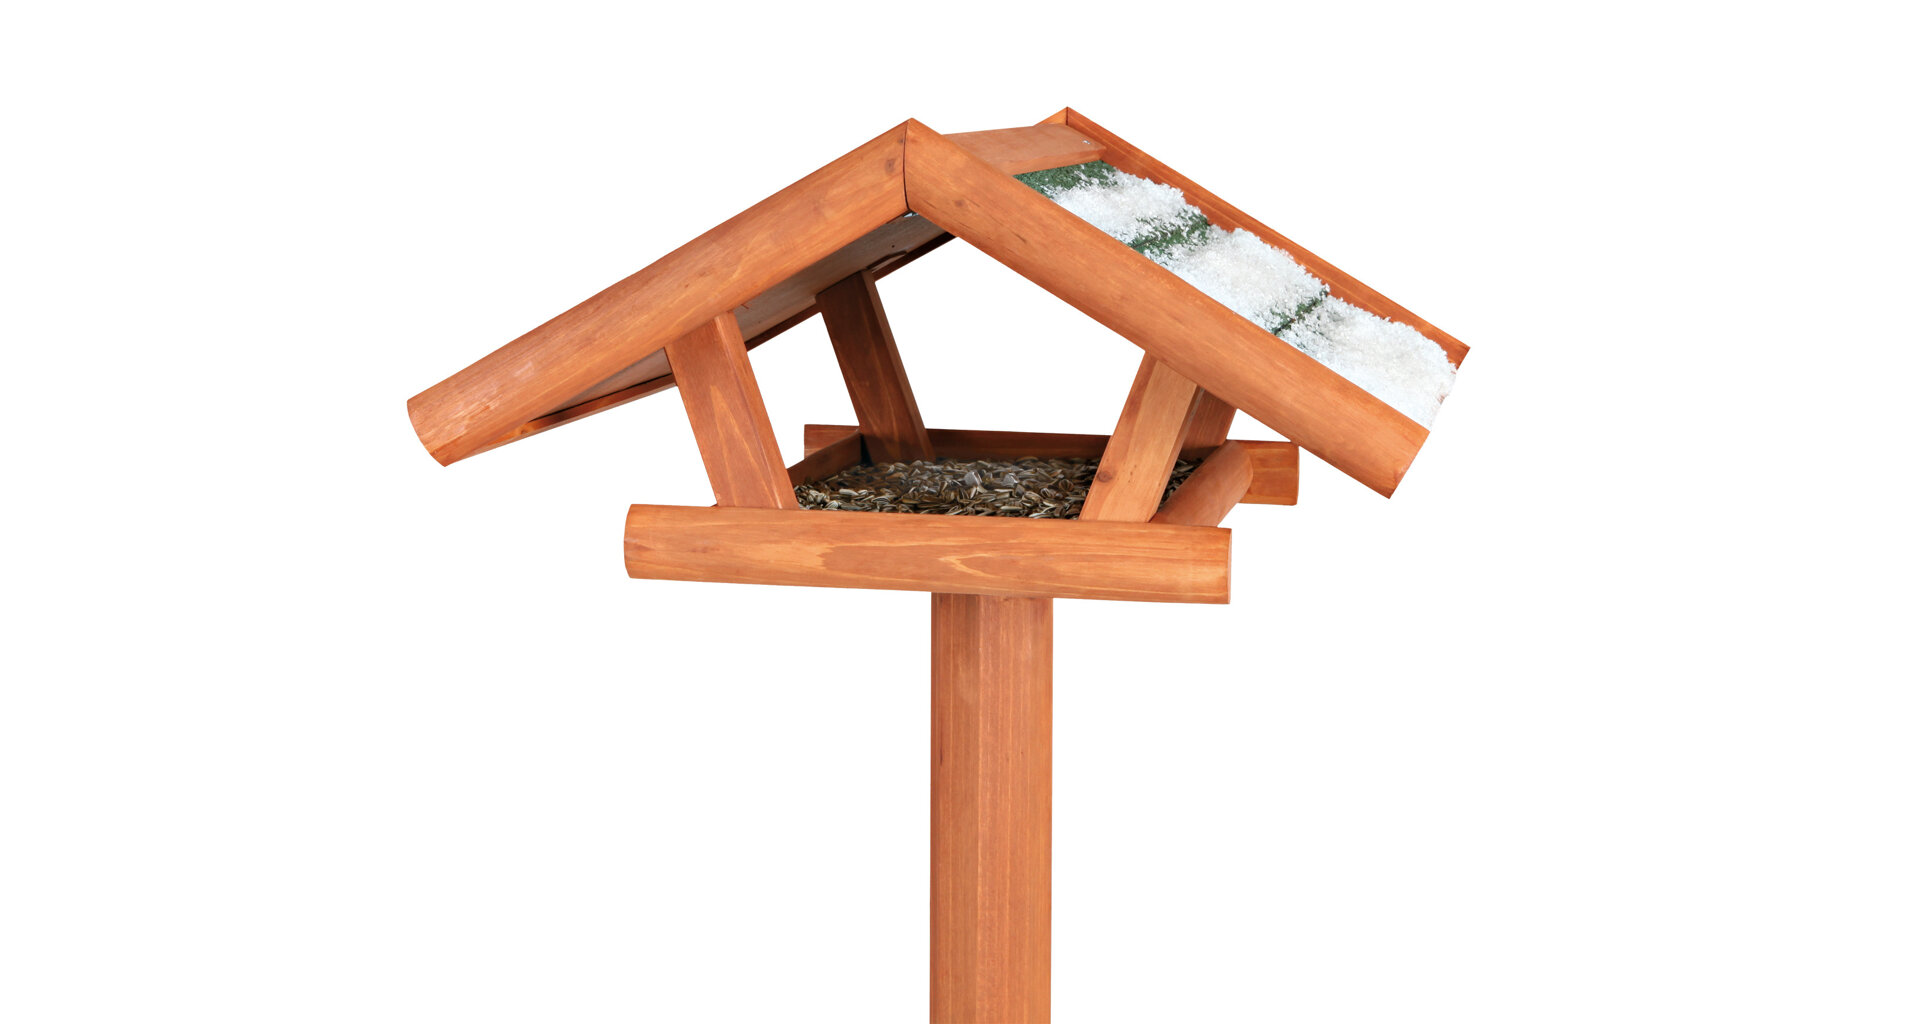 Trixie Natura outdoor feeder on a stand 46x22x44cm / 1.15m